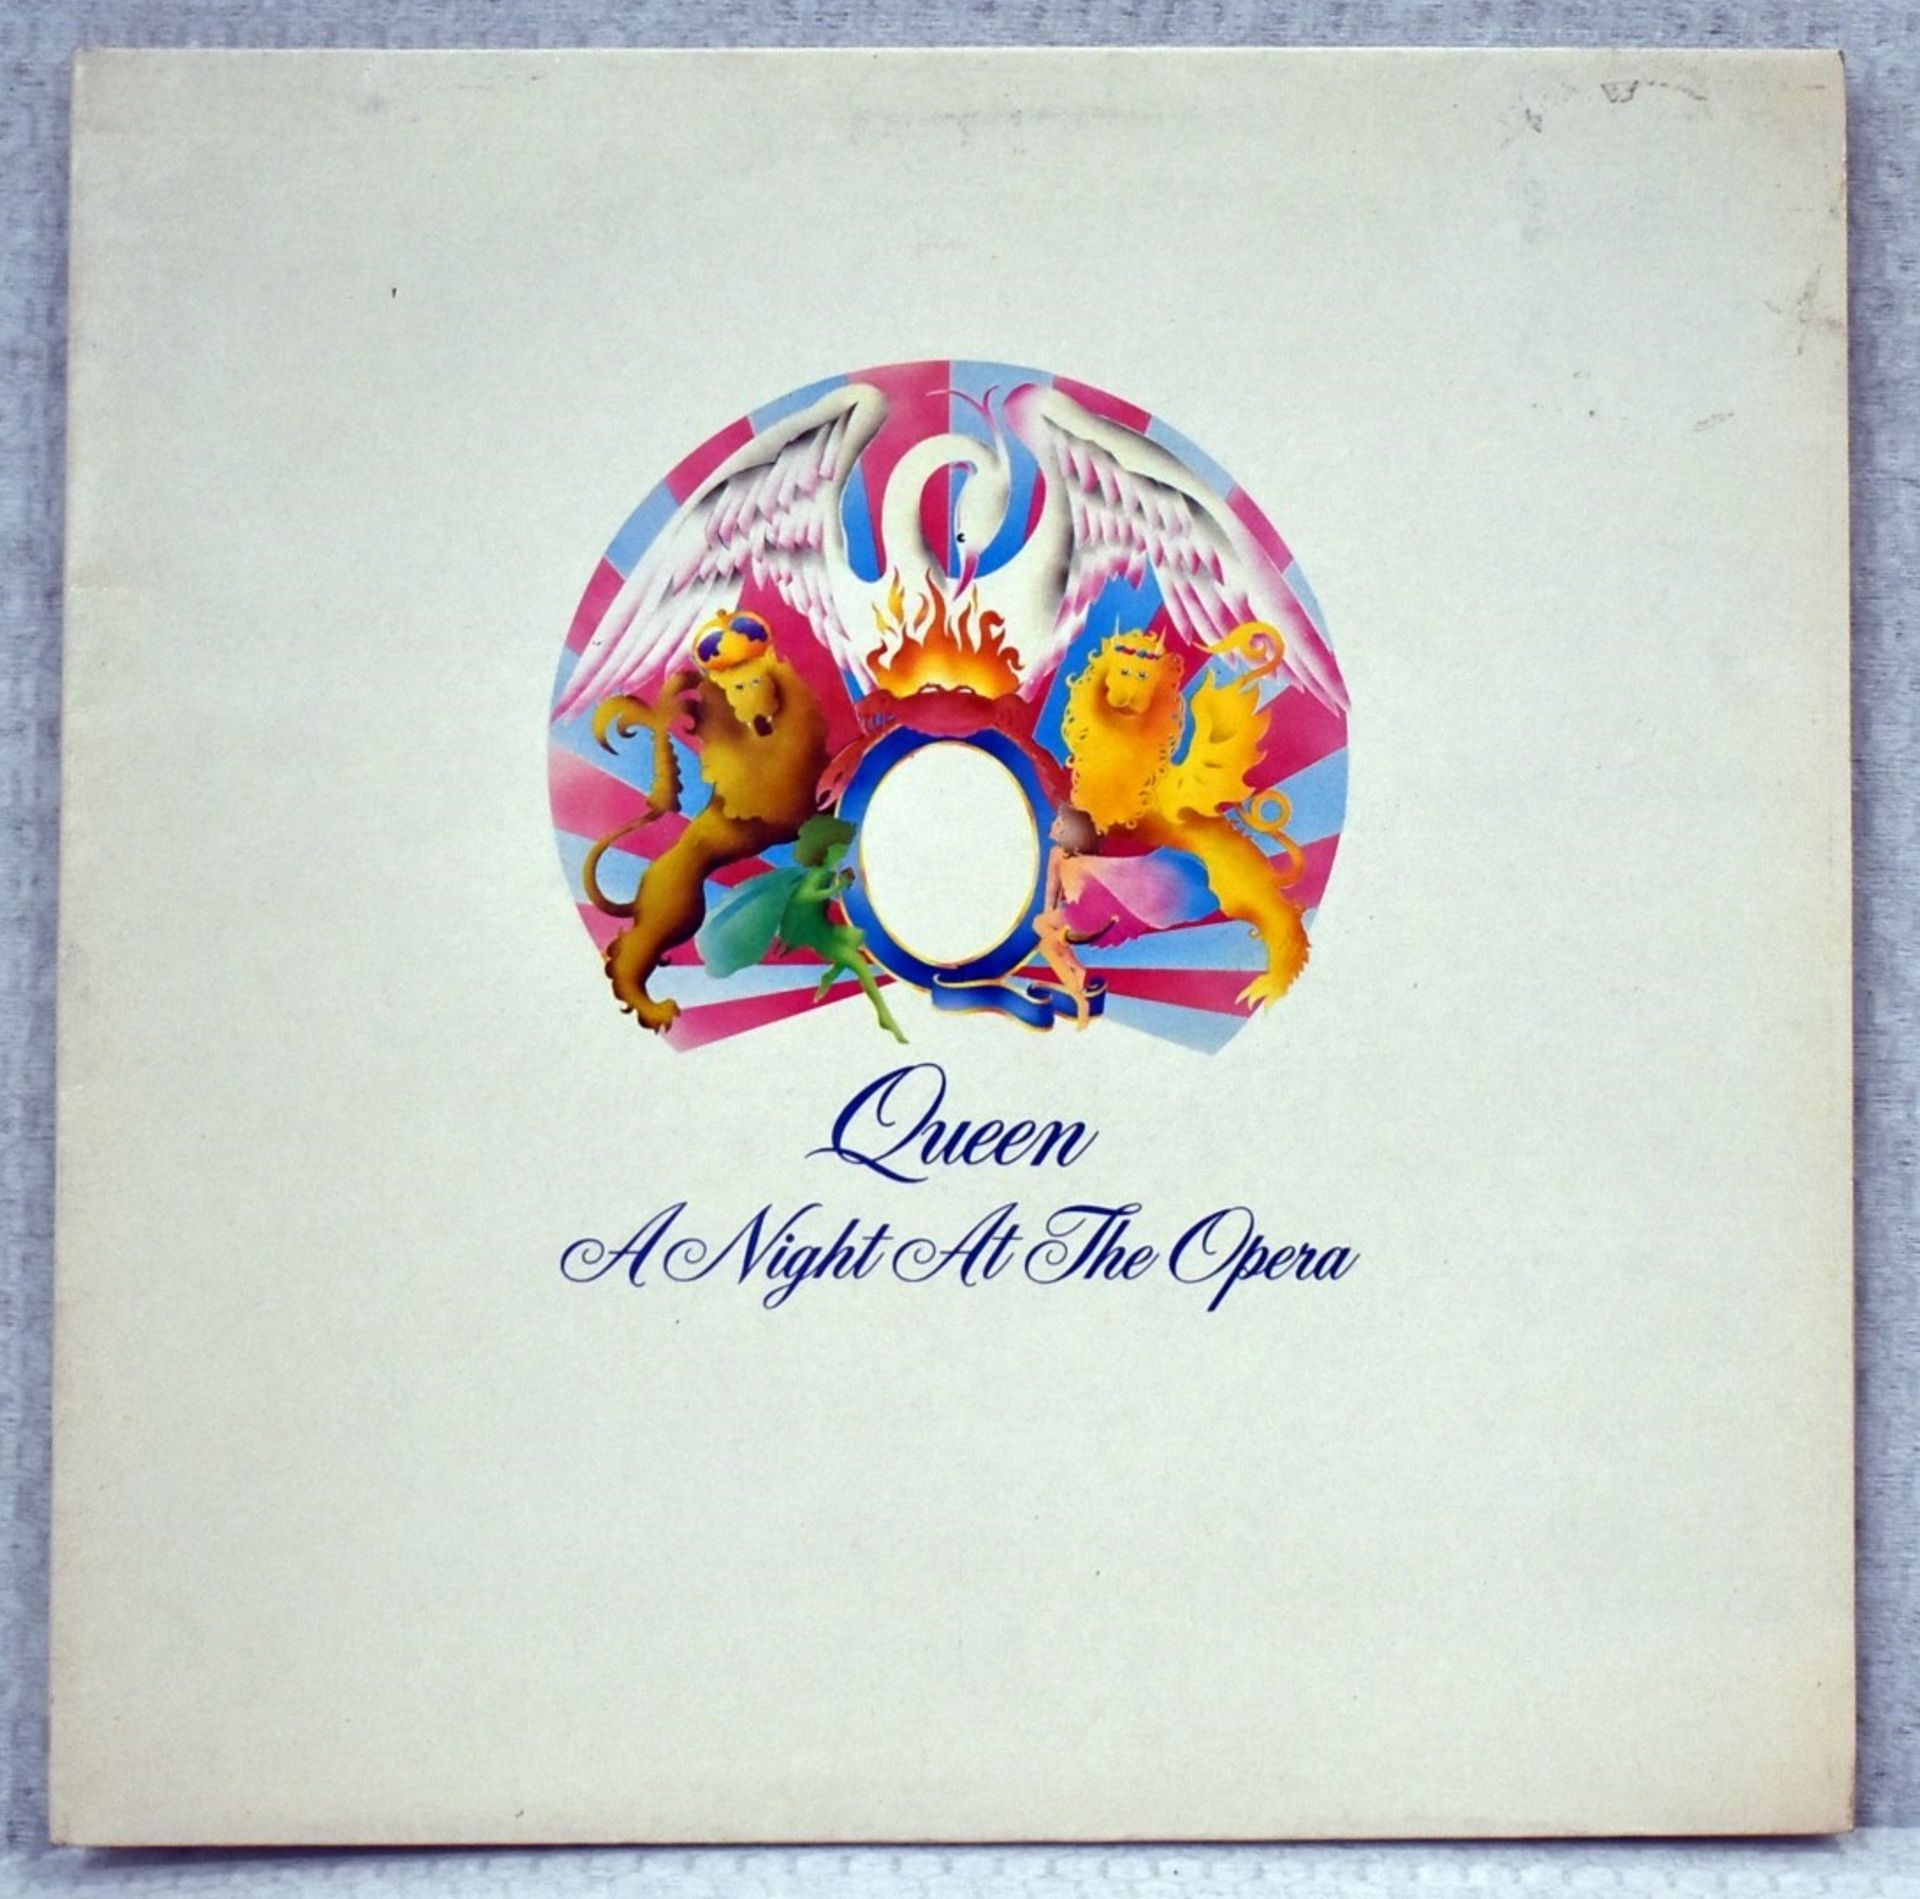 1 x QUEEN A Night At The Opera LP by EMI Records 1975 2 Sided 12 Inch Vinyl with Lyrics - Ref: - Image 2 of 21